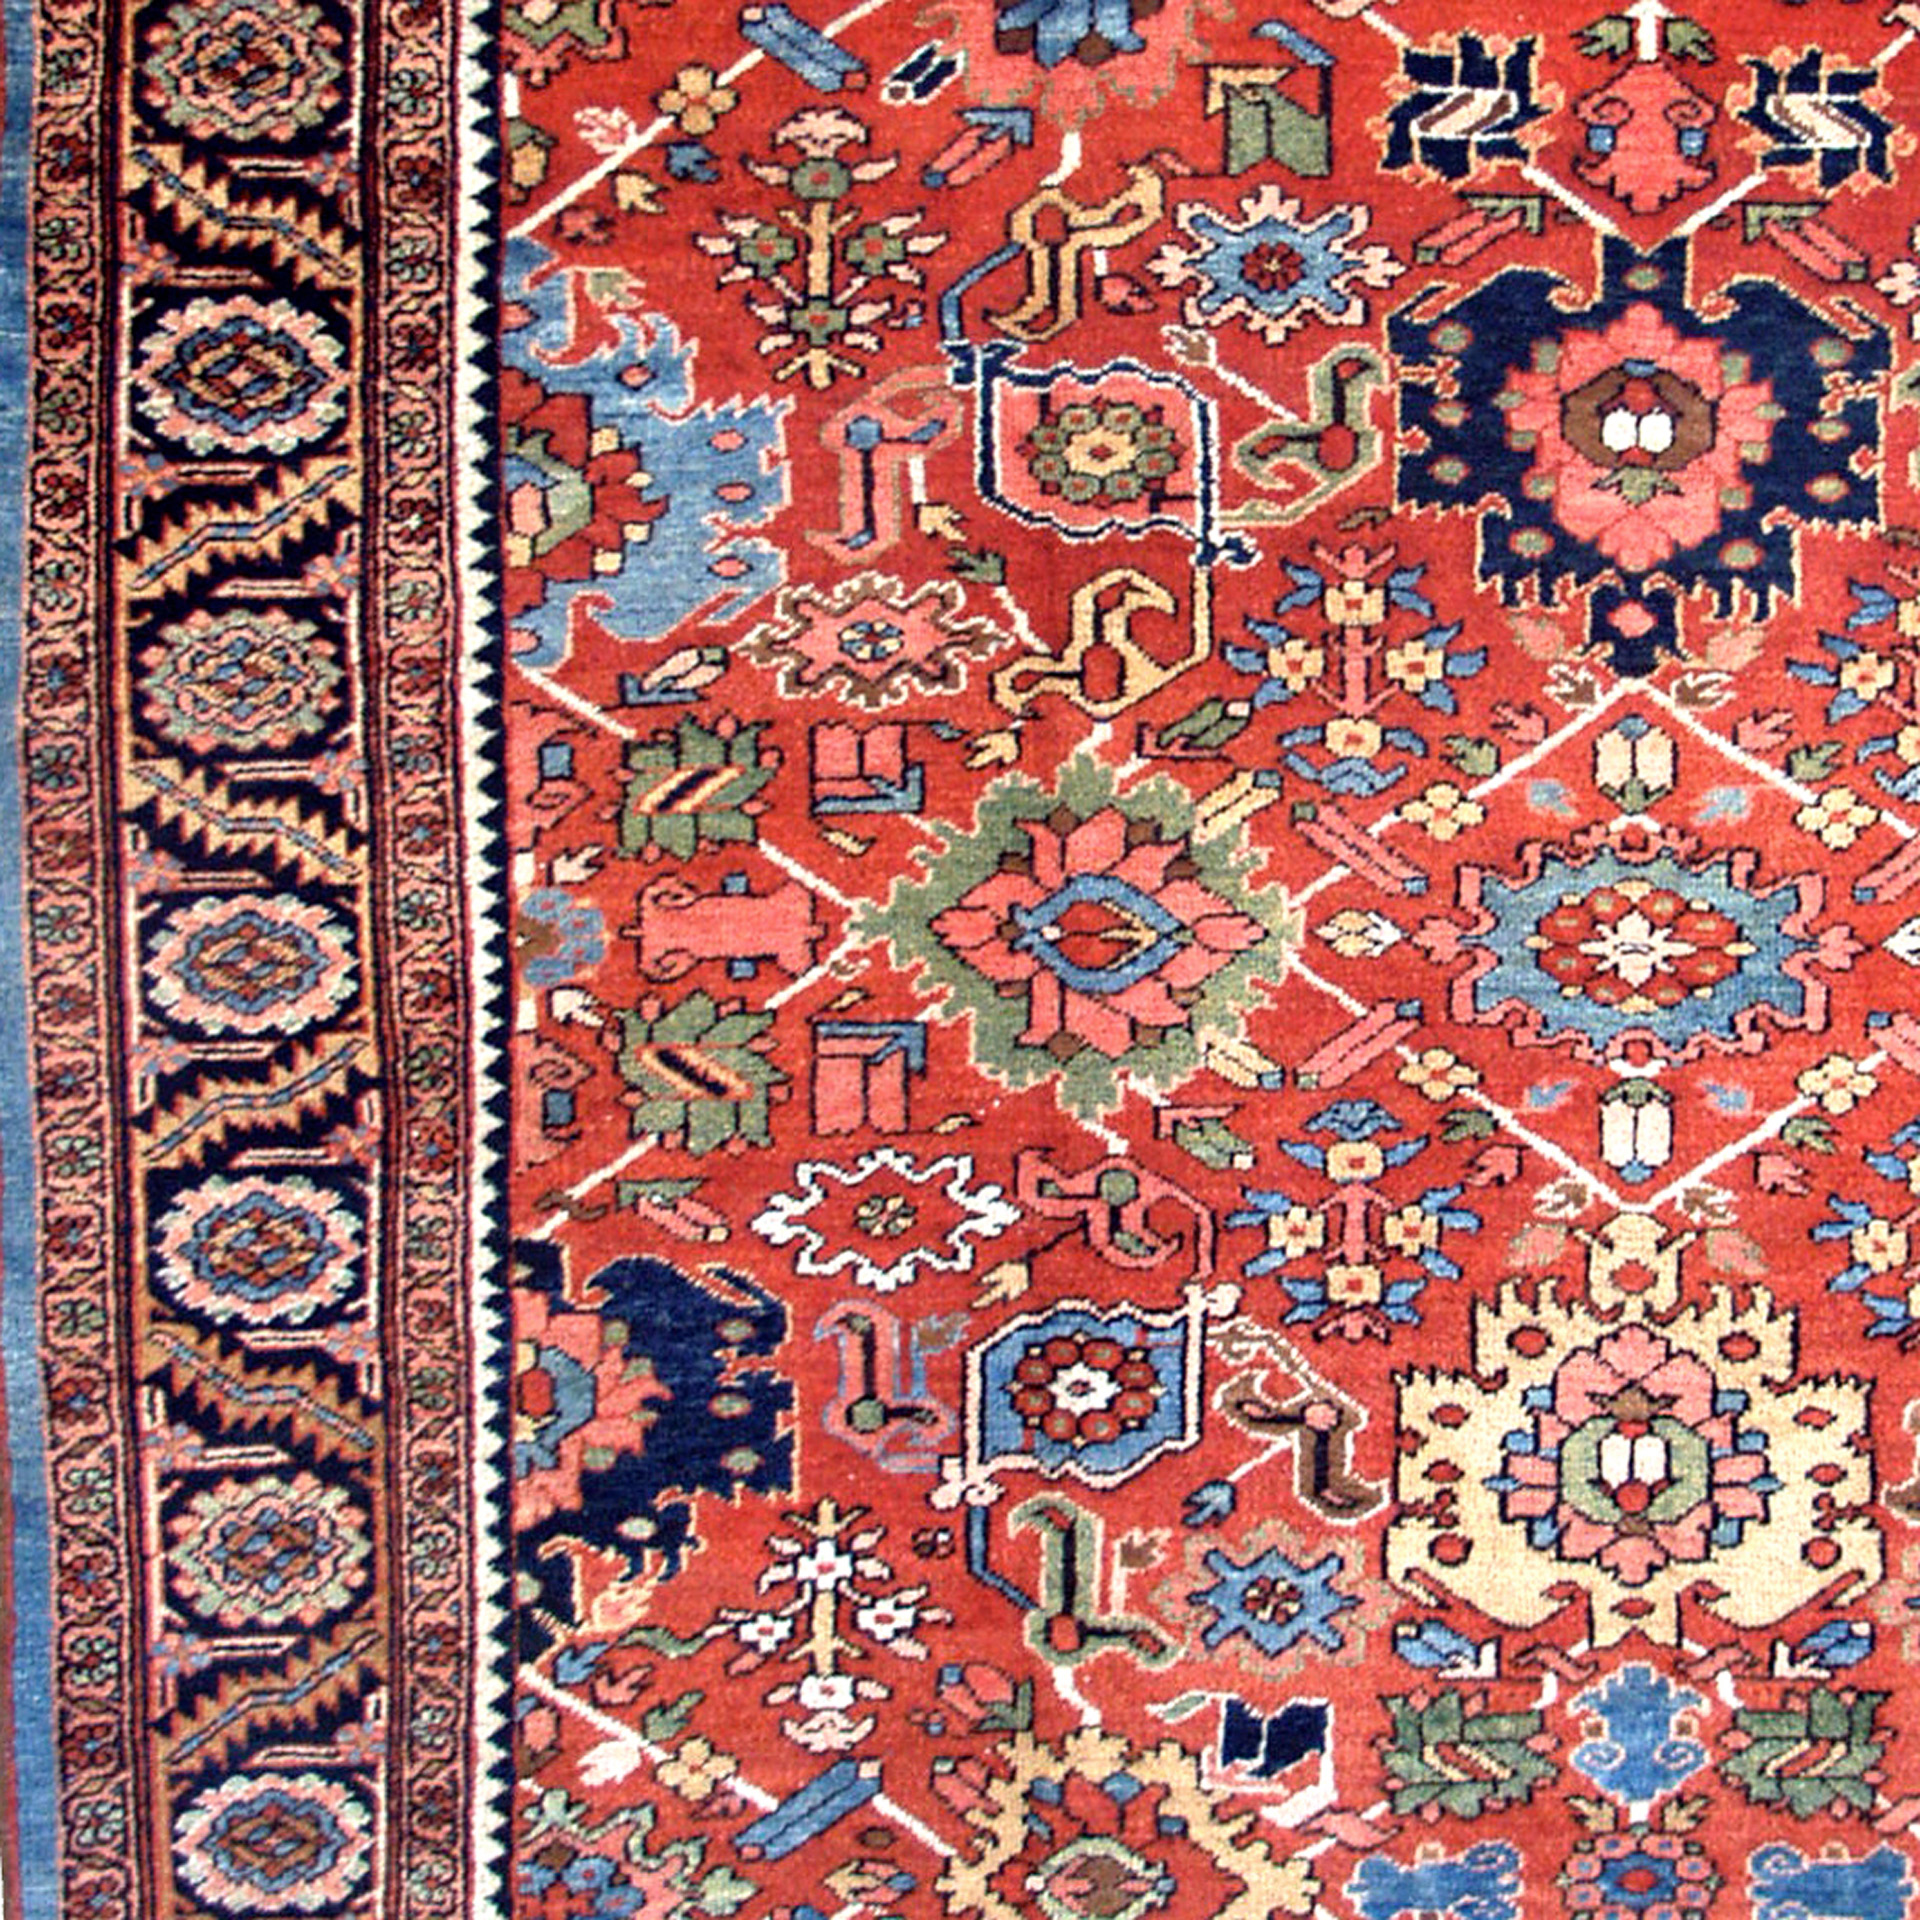 Detail of the Harshang design of palmettes and flowers in an antique Persian Heriz carpet, circa 1920 - Douglas Stock Gallery antique carpet research archives